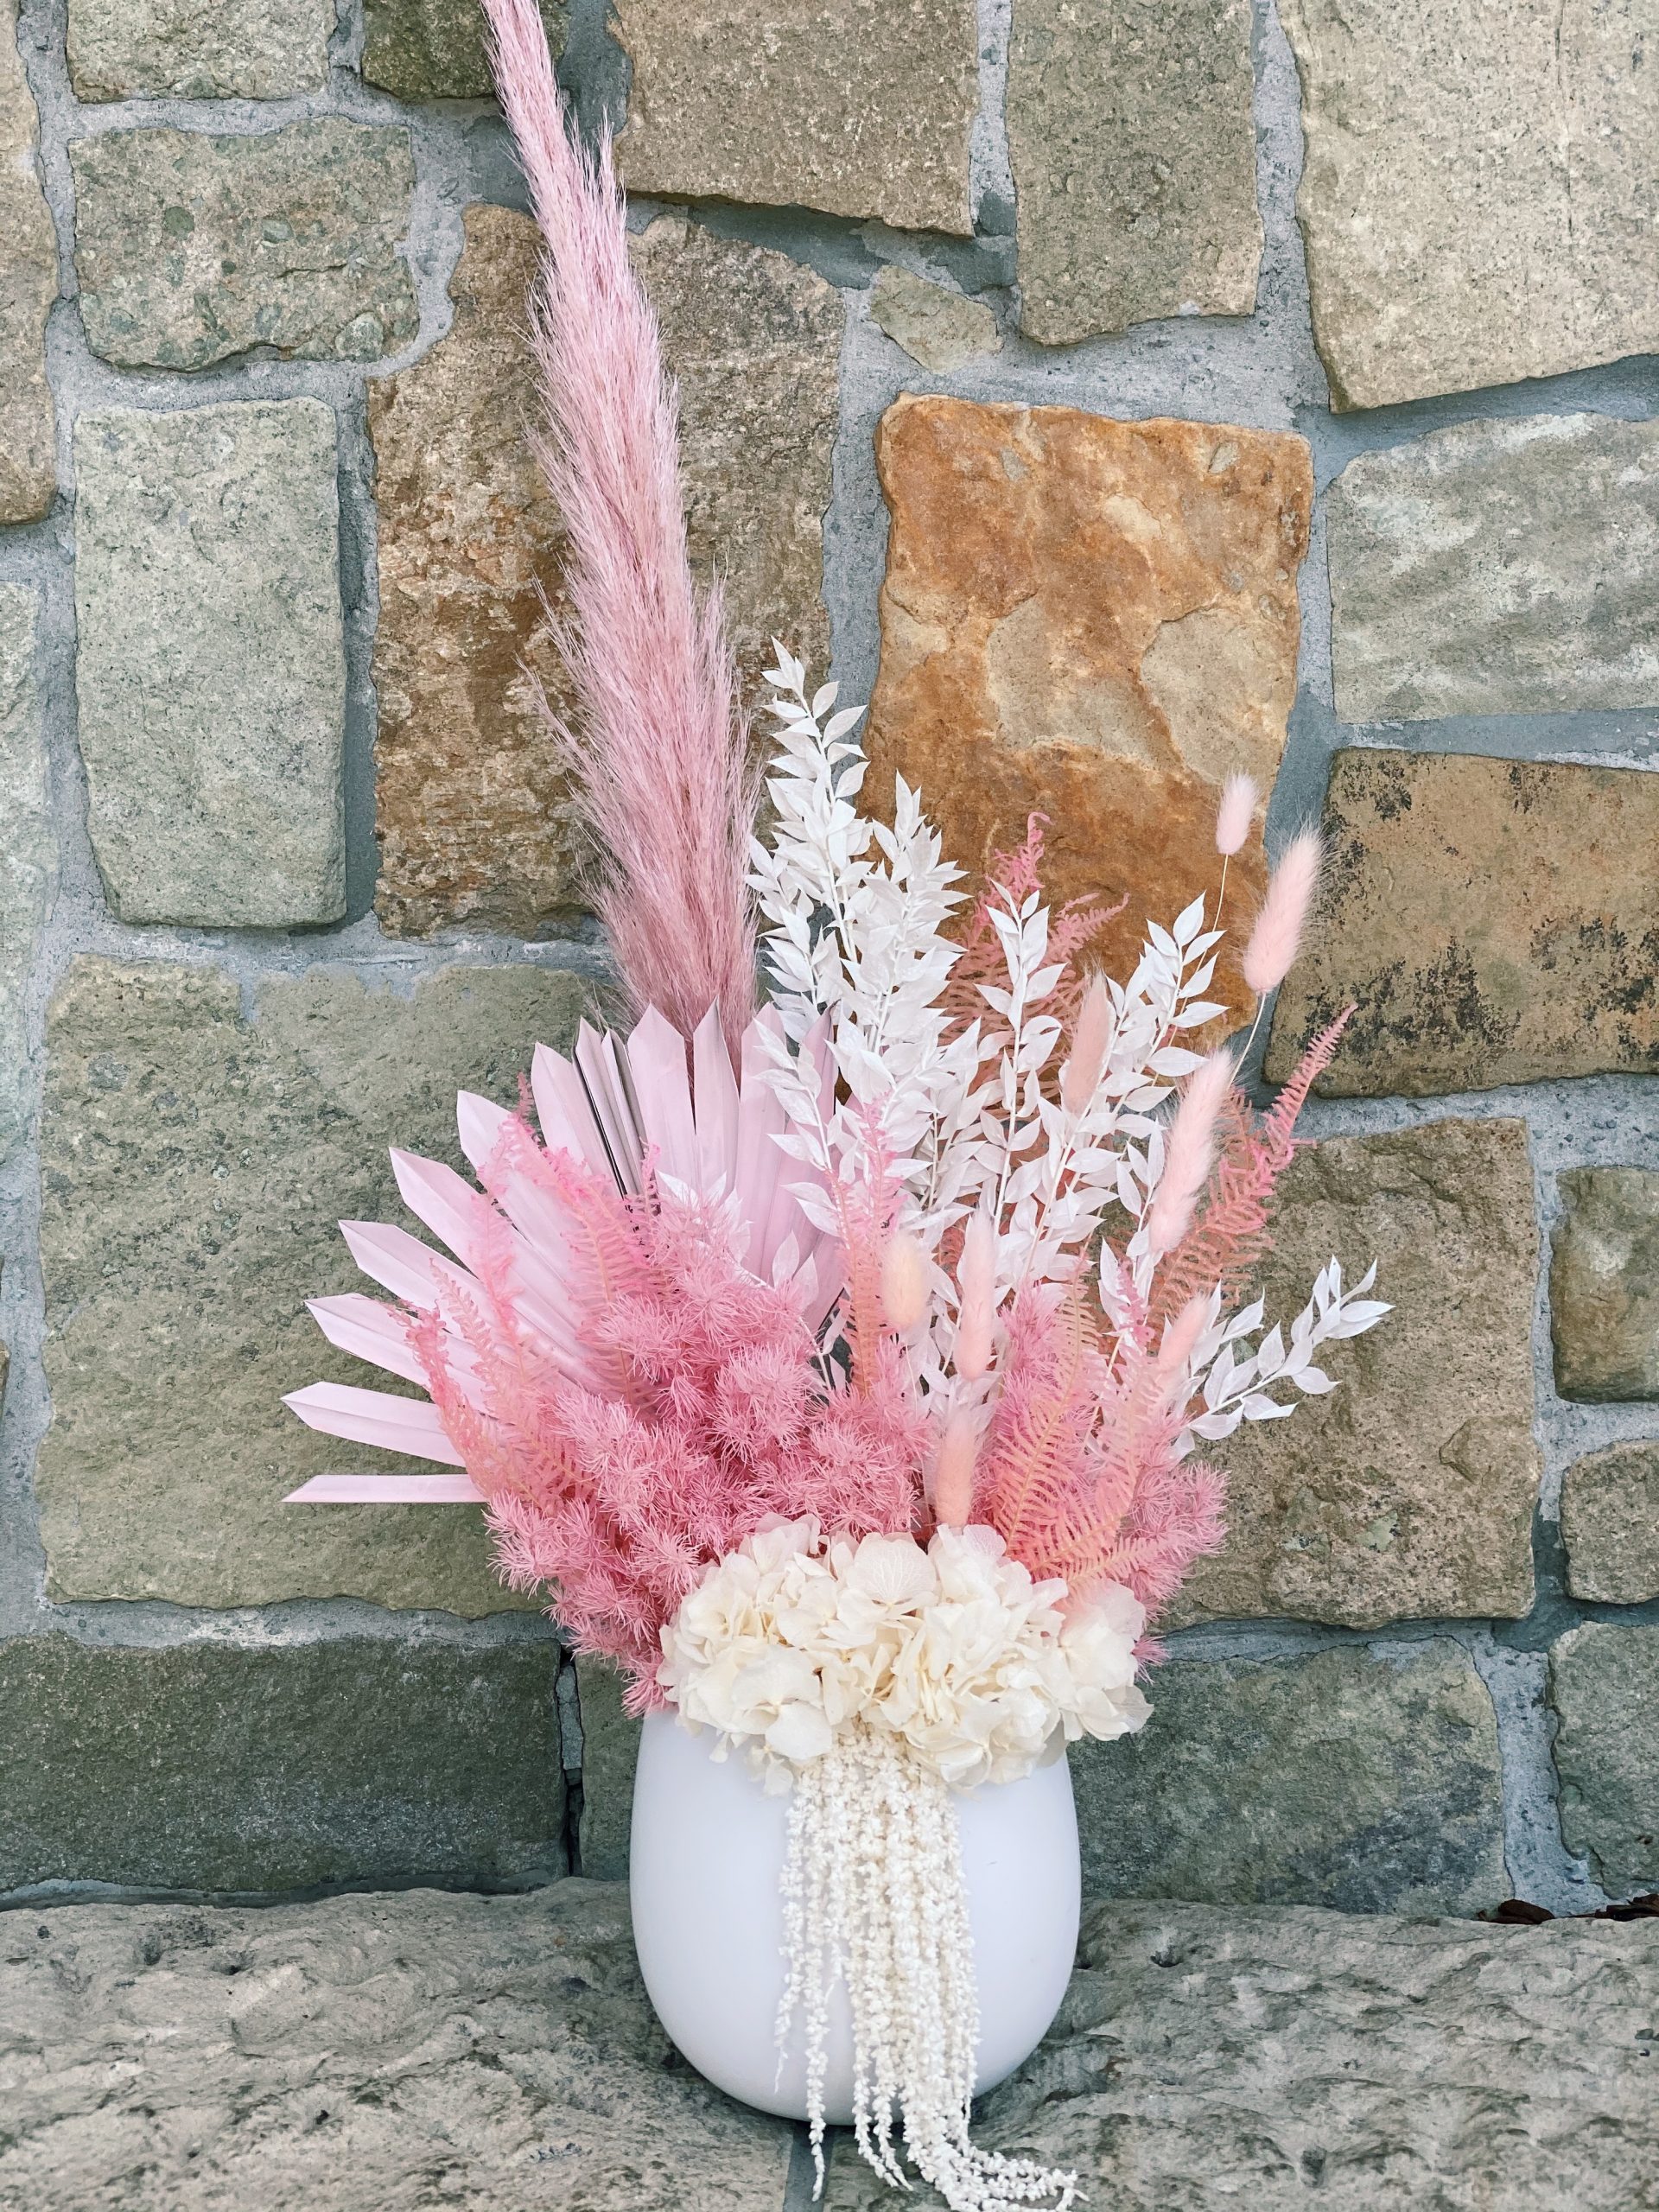 Magnificent Pink and White Dried and Preserved Arrangement - The Lush Lily  - Brisbane & Gold Coast Florist Flower Delivery - Carindale, Loganholme  Brisbane Gold Coast Buy flowers online